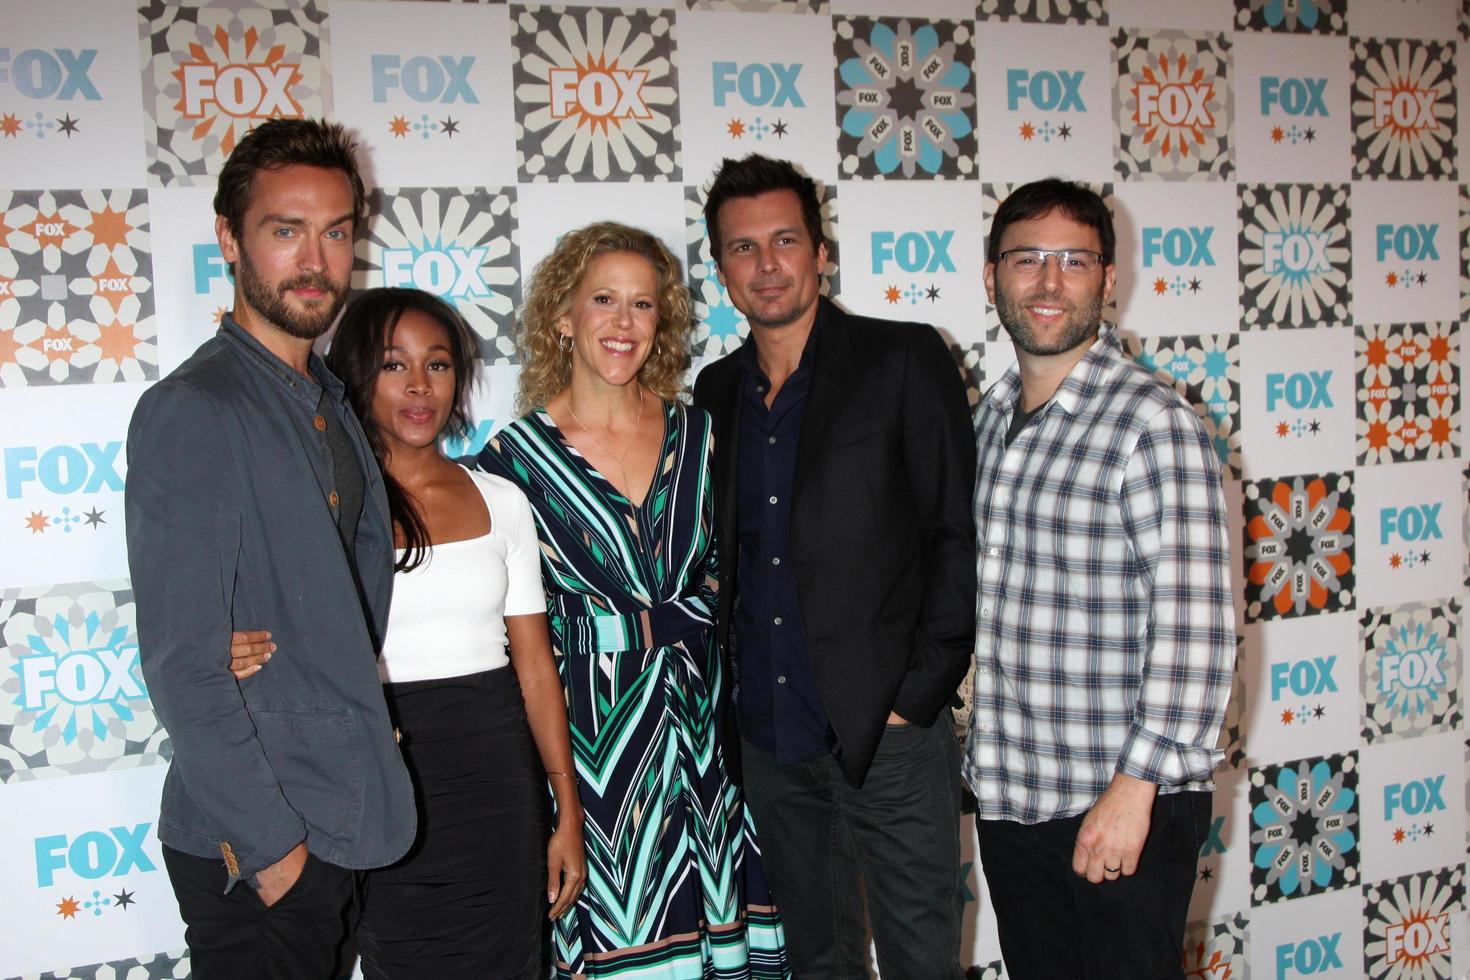 LOS ANGELES, JUL 20 - Sleepy Hollow Cast and Producers - Tom Mison, Nicole Beharie, Heather Kadin, Len WIseman, Mark Goffman at the FOX TCA July 2014 Party at the Soho House on July 20, 2014 in West Hollywood, CA photo